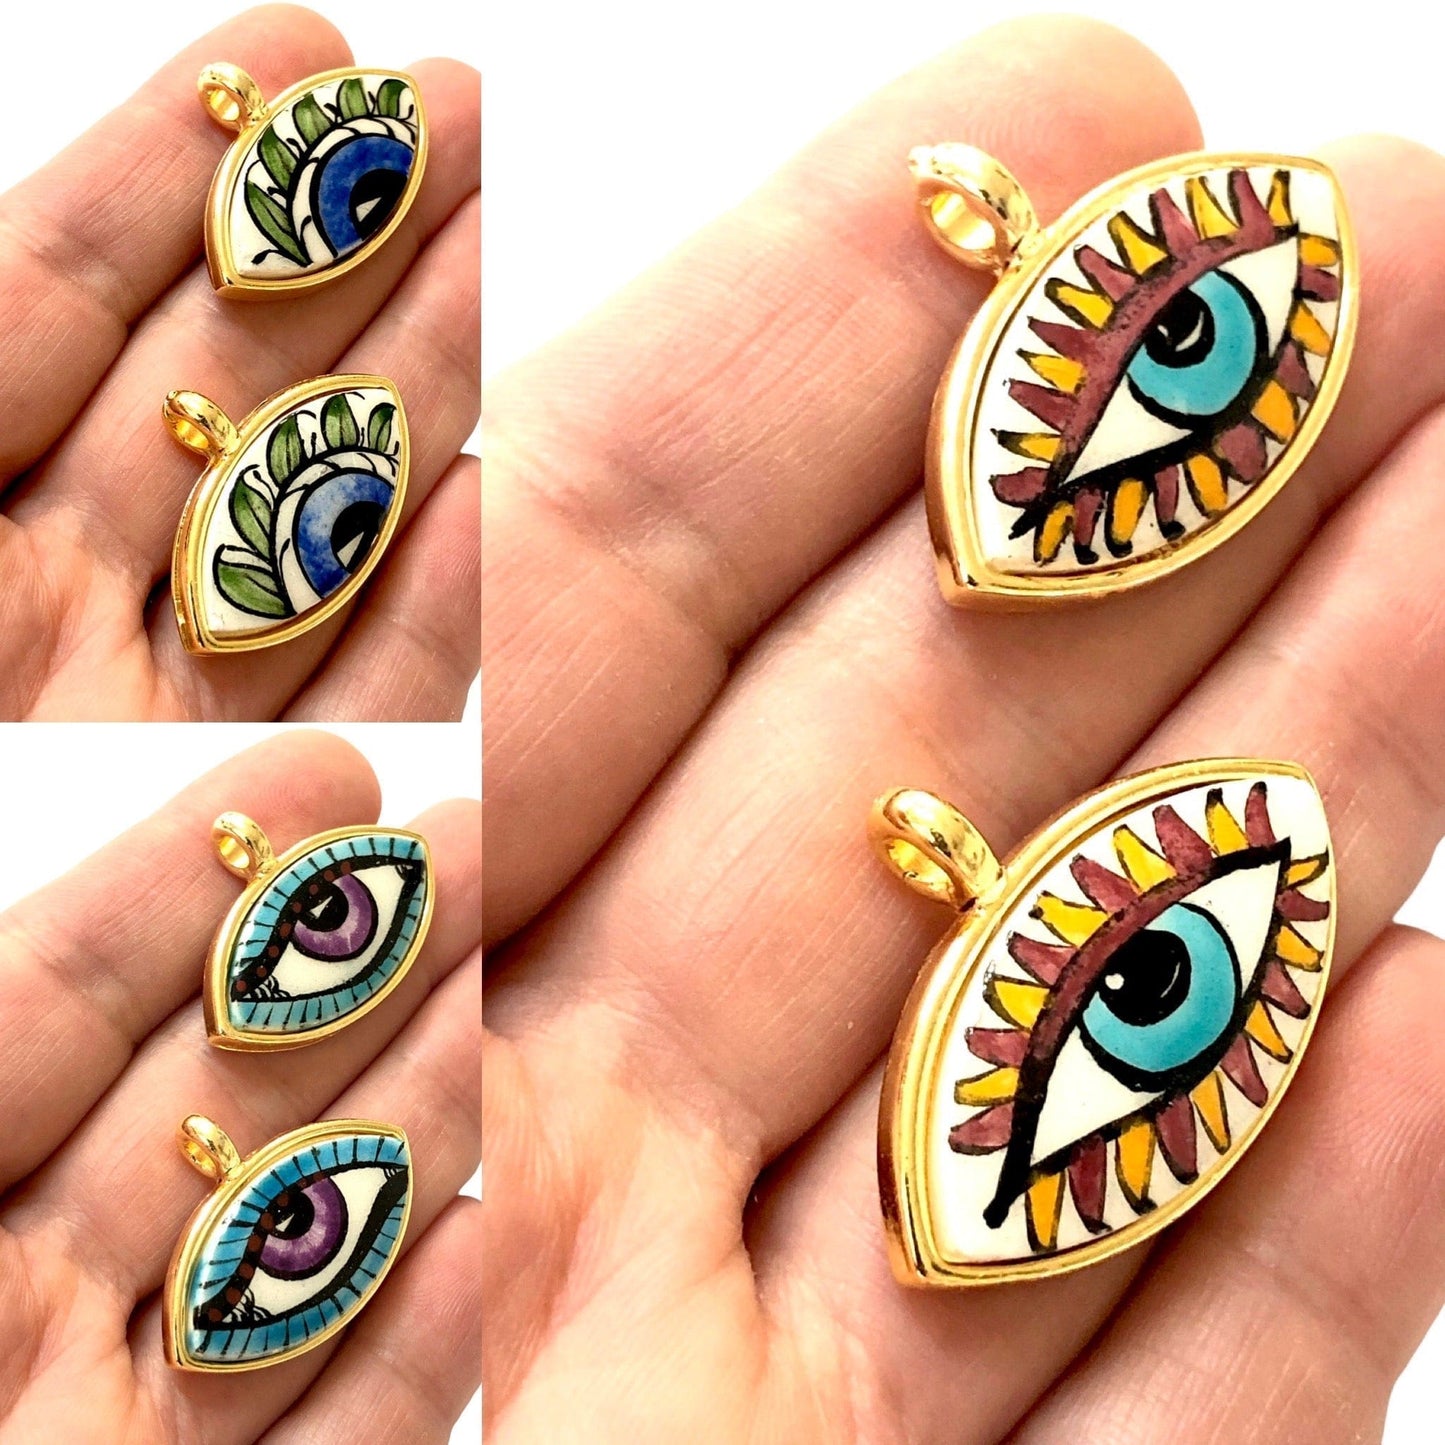 Large Gold Plated Framed Hand Painted Ceramic Eye Pendant-027